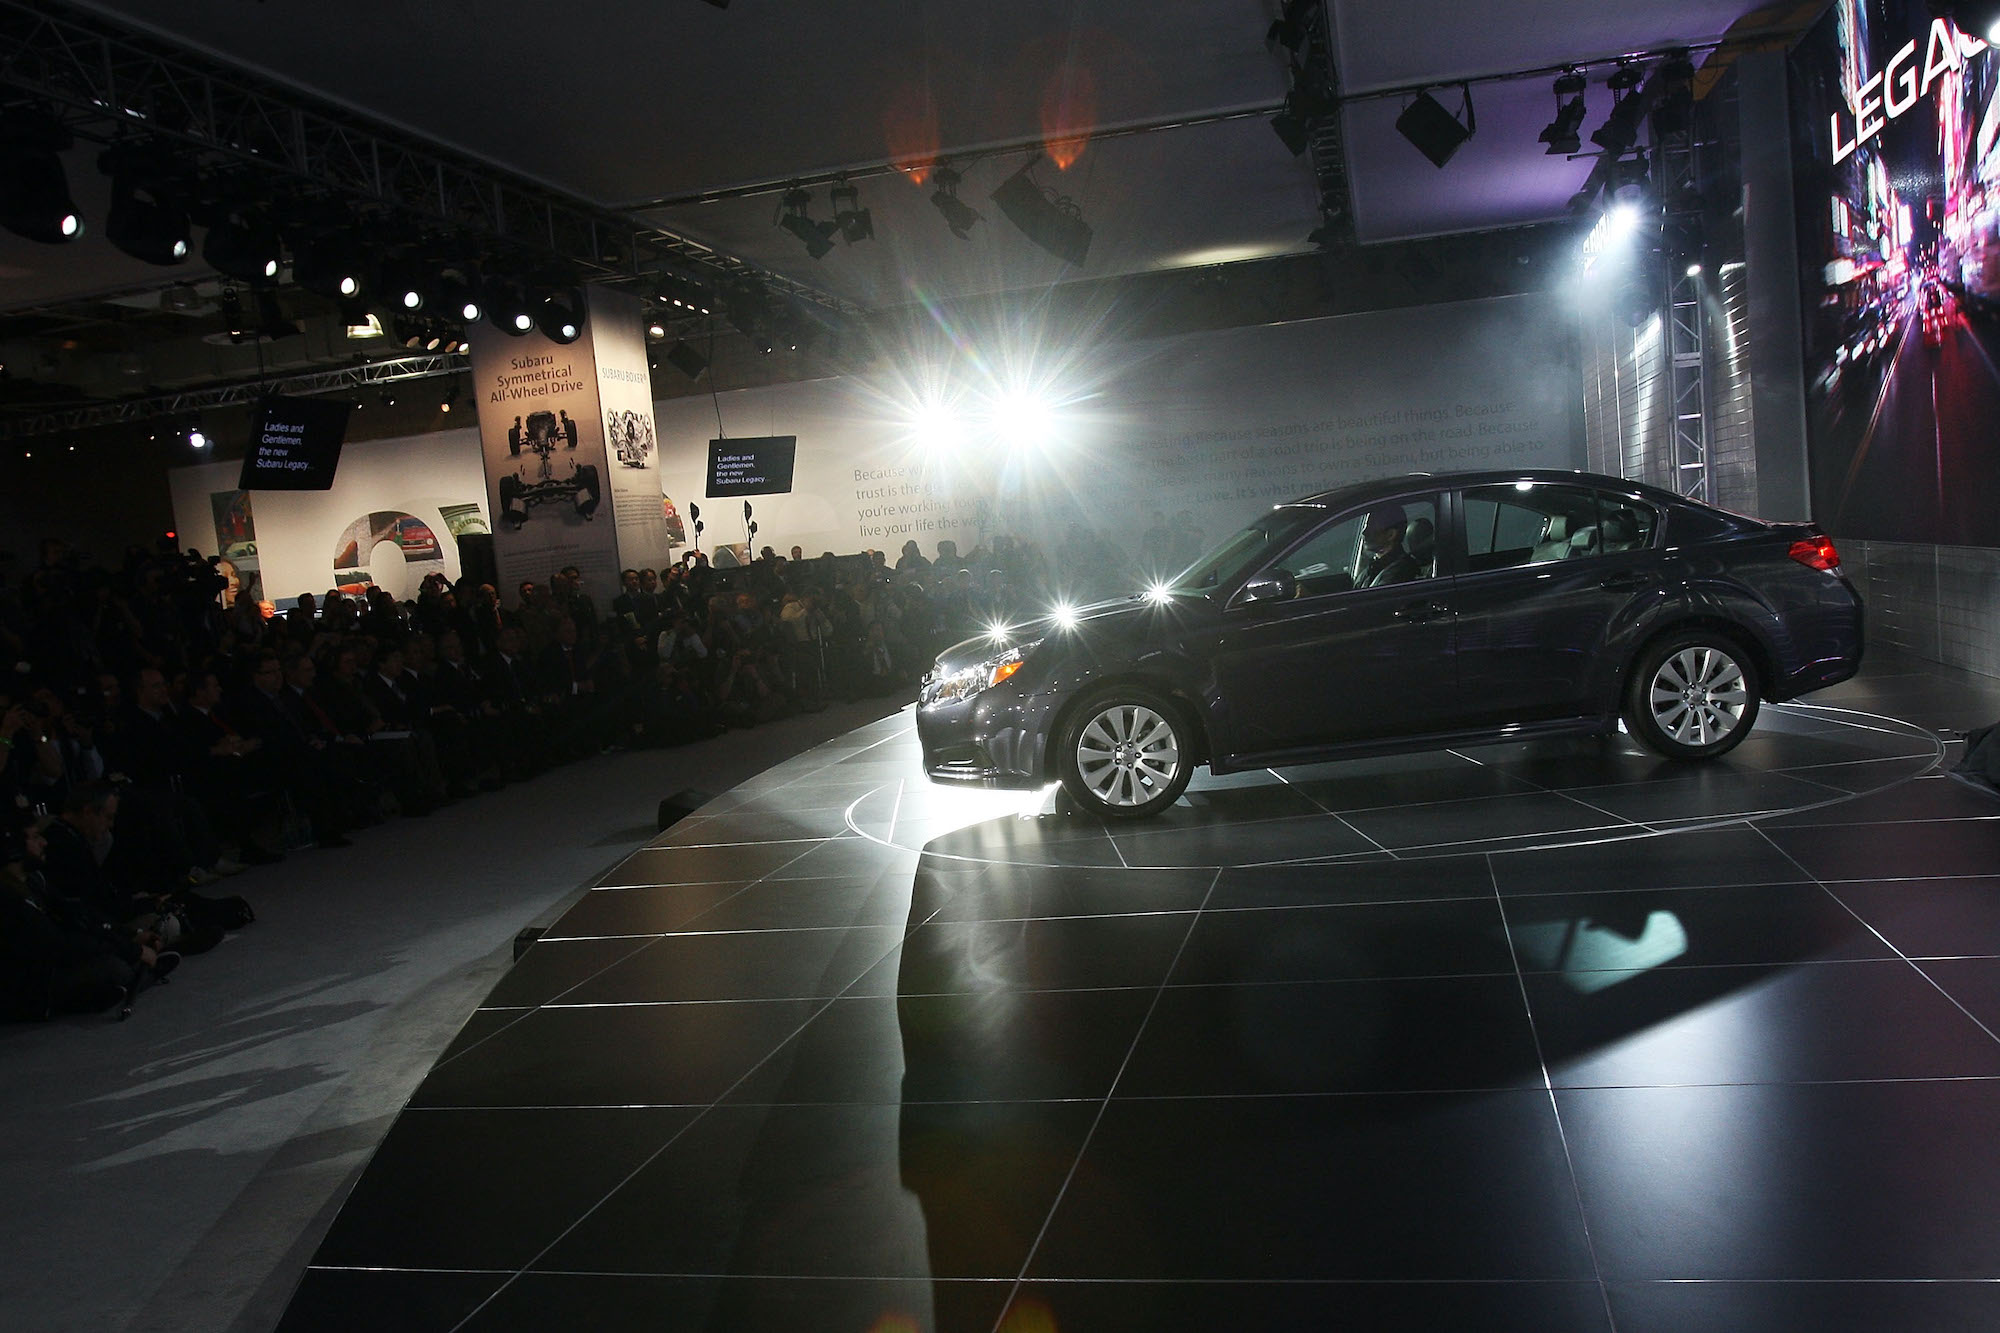 The new Subaru 2010 Legacy is debuted during the press preview for the New York Auto Show